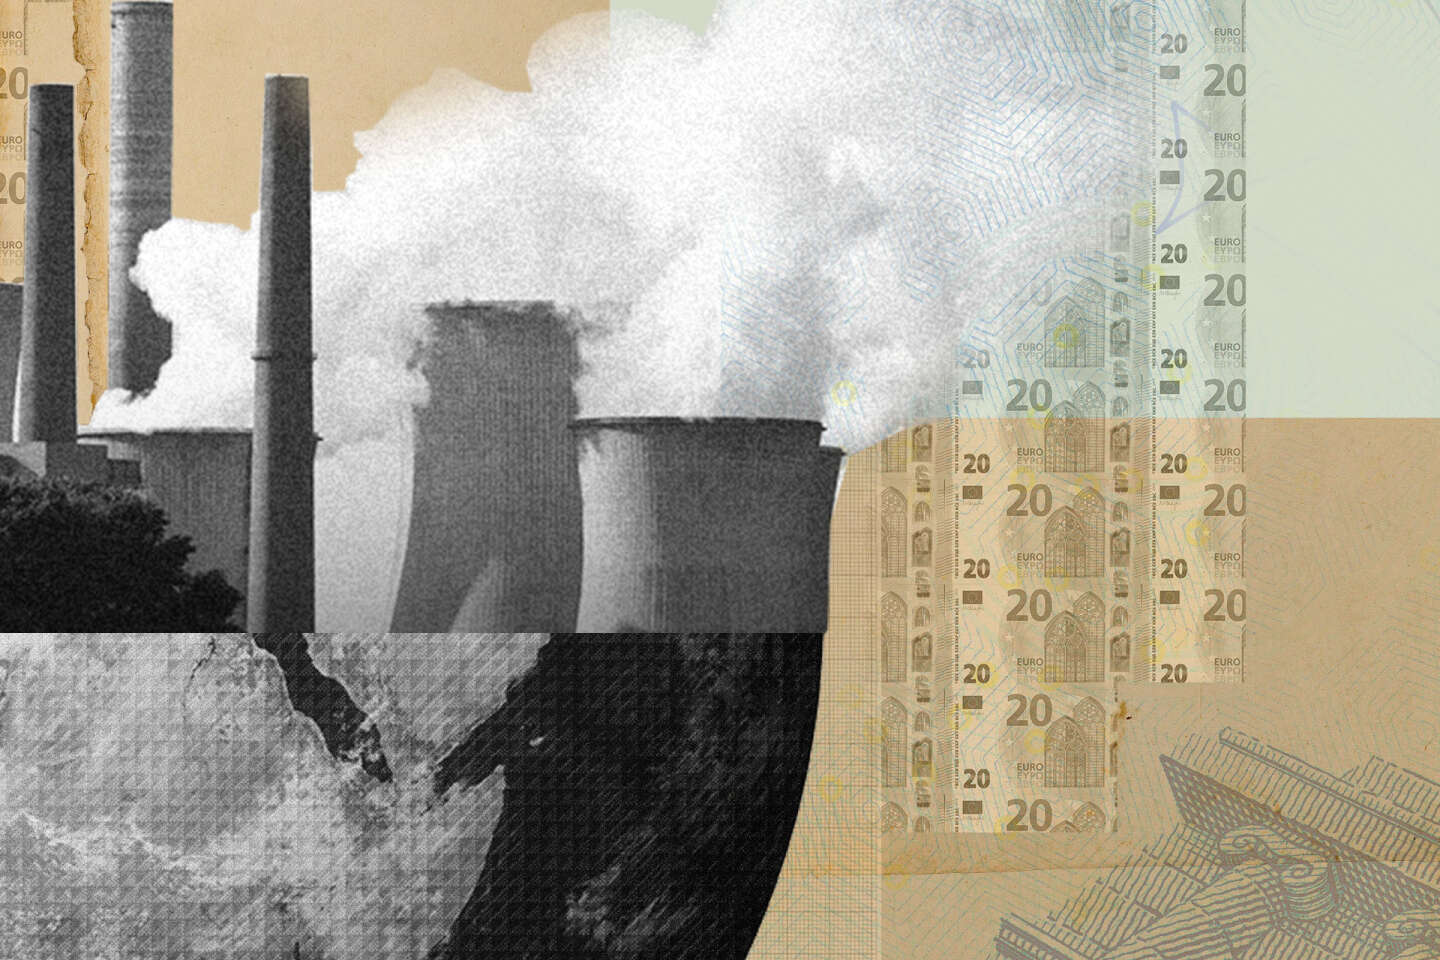 The list of 388 'Dark Green' funds that invest in fossil fuels